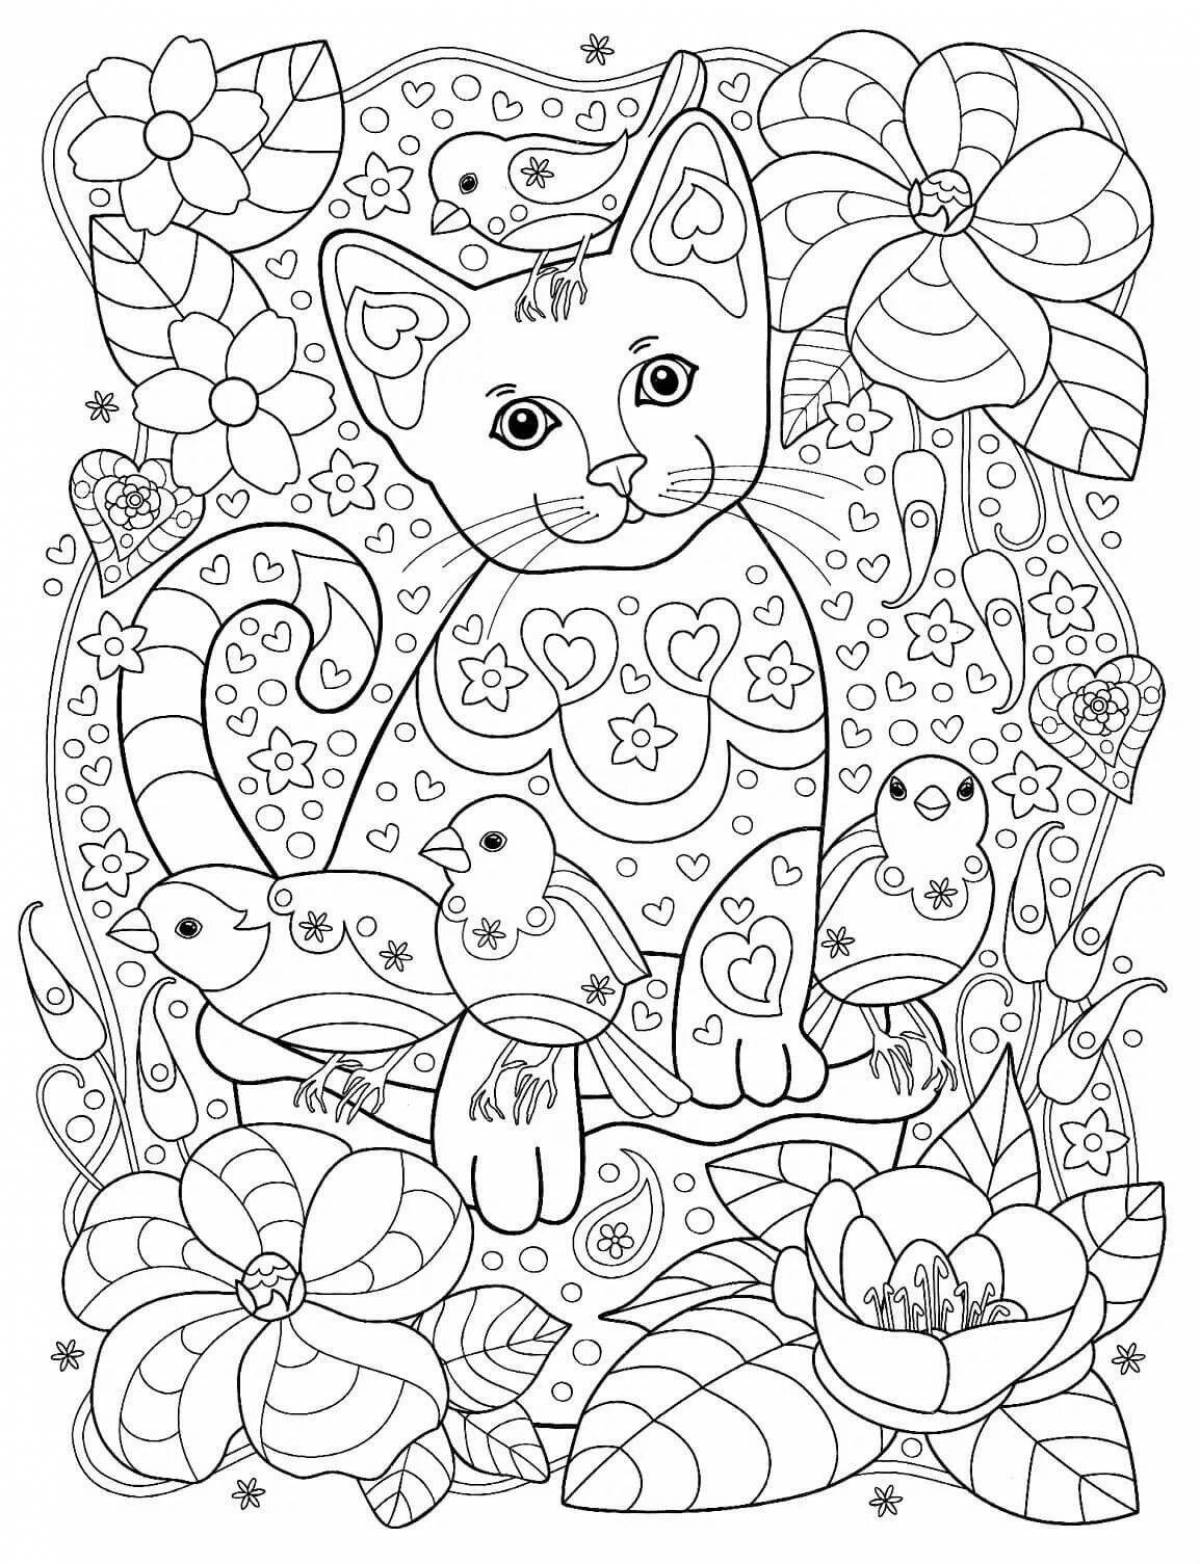 Awesome cat coloring by numbers